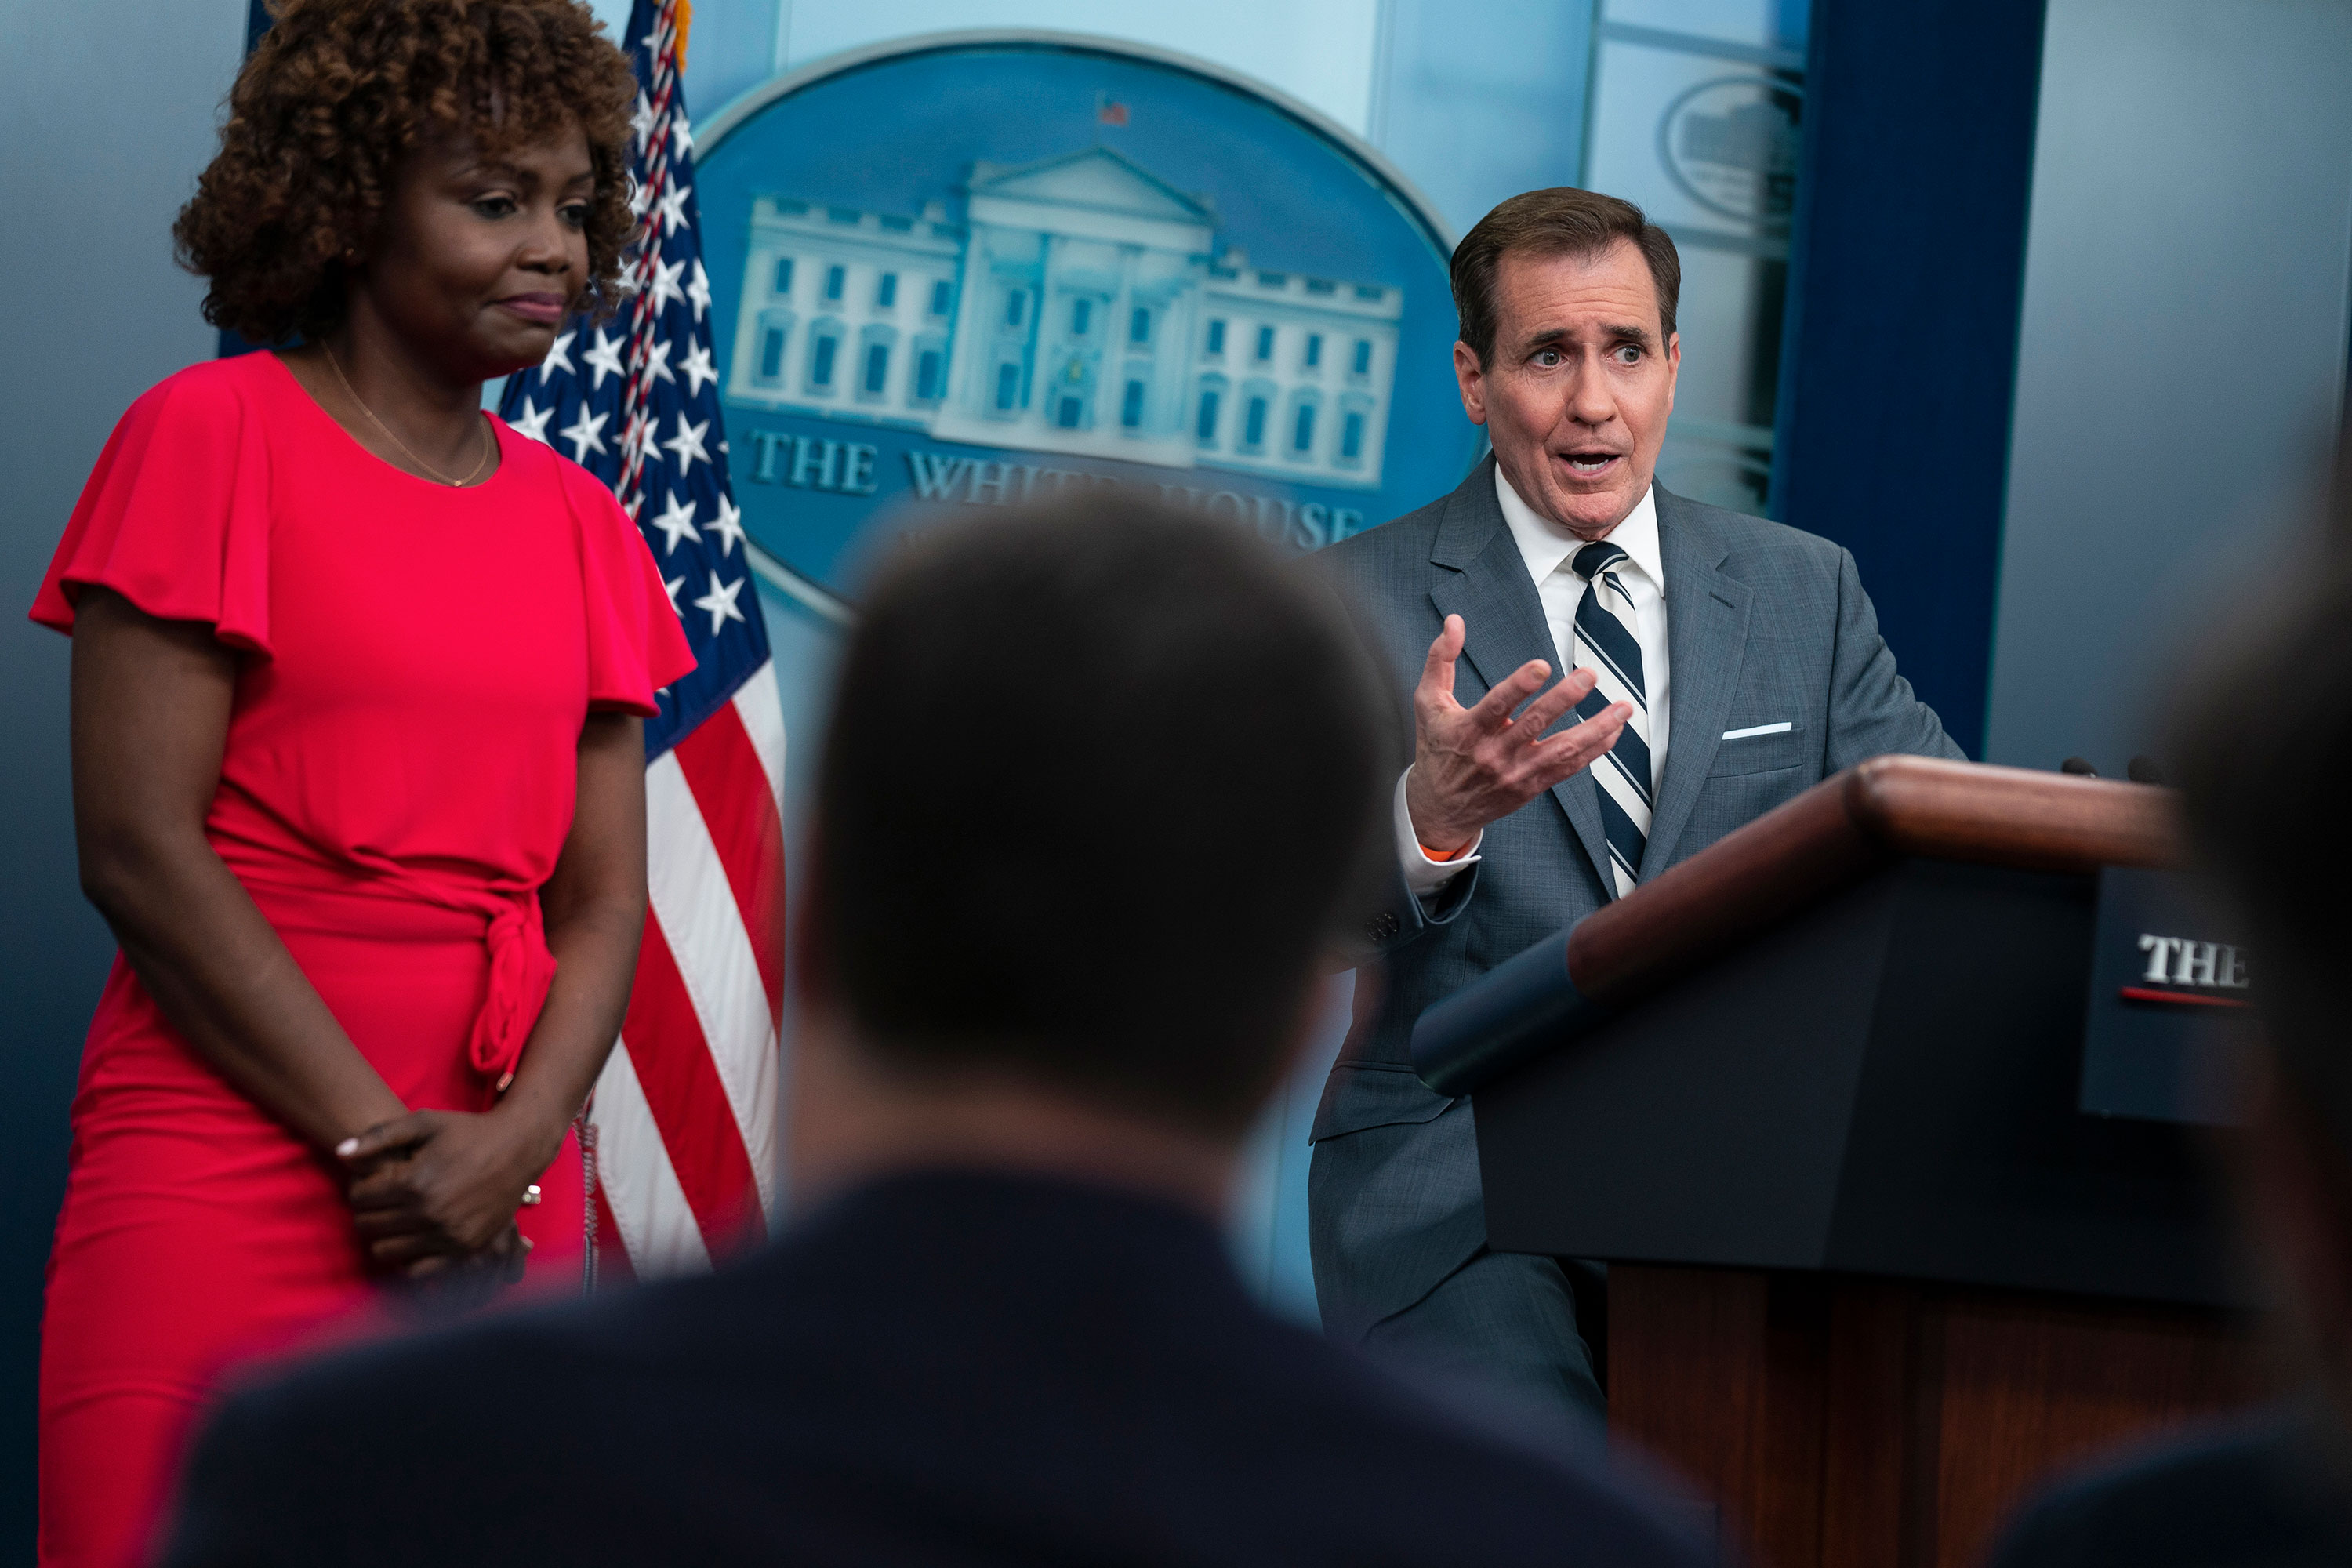 White House press secretary Karine Jean-Pierre listens as National Security Council spokesman John Kirby speaks during a press briefing at the White House on Thursday.